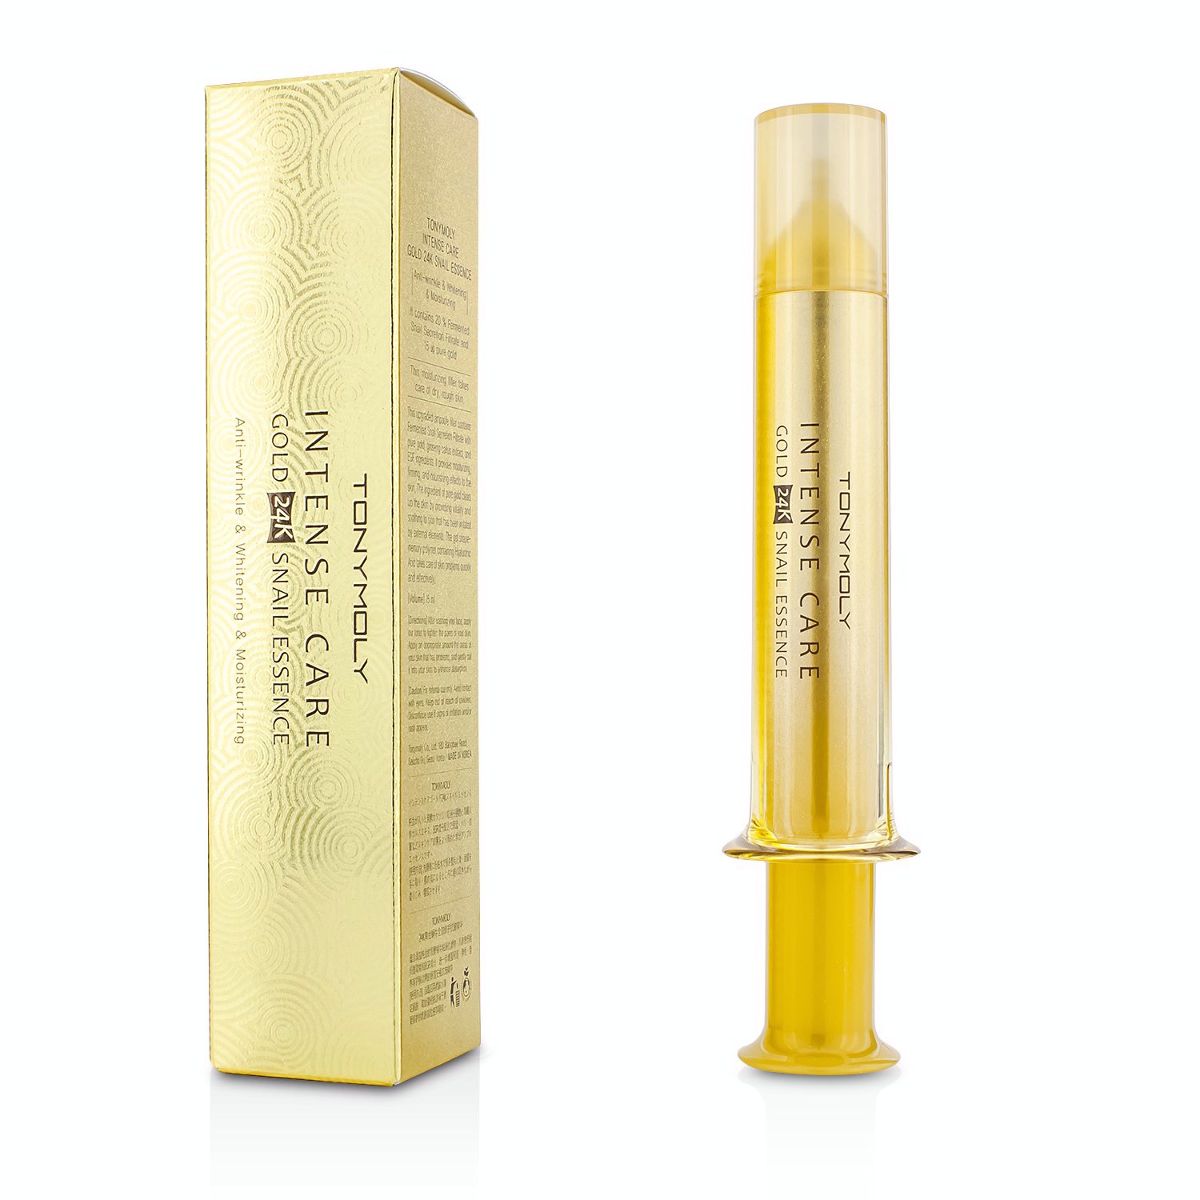 Intense Care Gold 24K Snail Essence (Manufacture Date: 12/2014) TonyMoly Image